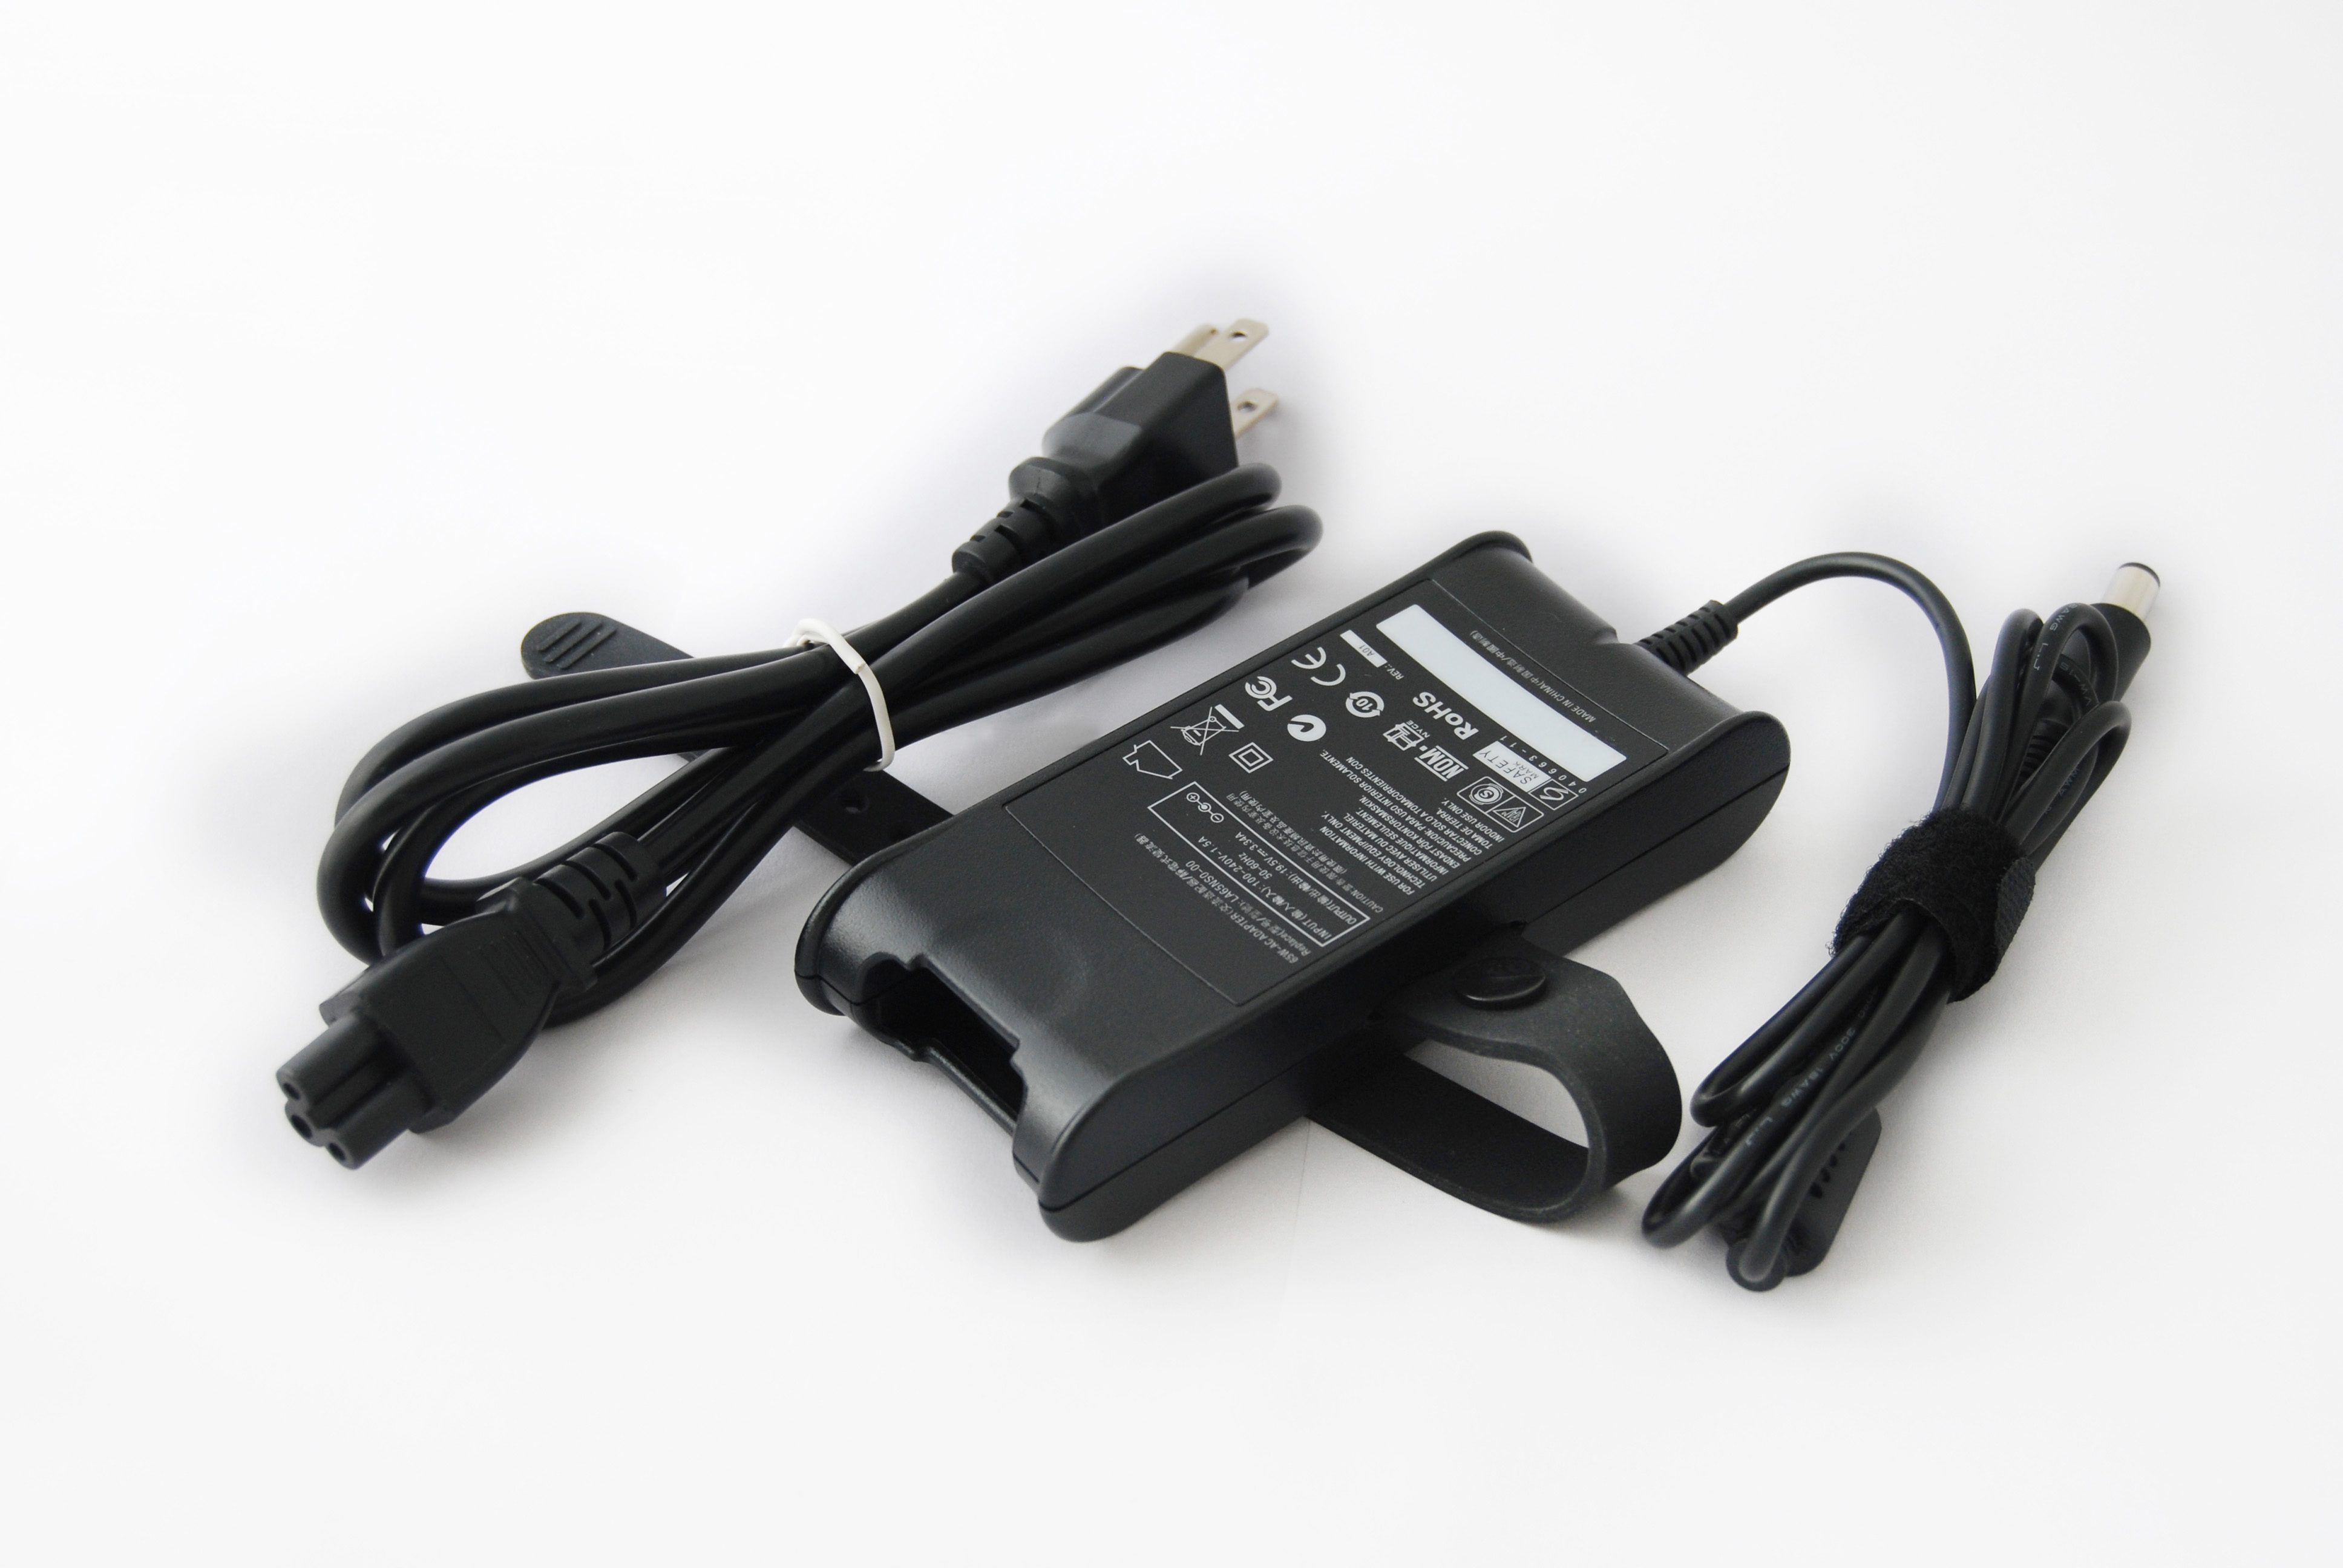 Superb Choice 65W Dell Inspiron 505M 600M 640M 700M 710M E1405 E1505 Laptop AC Adapter - image 1 of 1